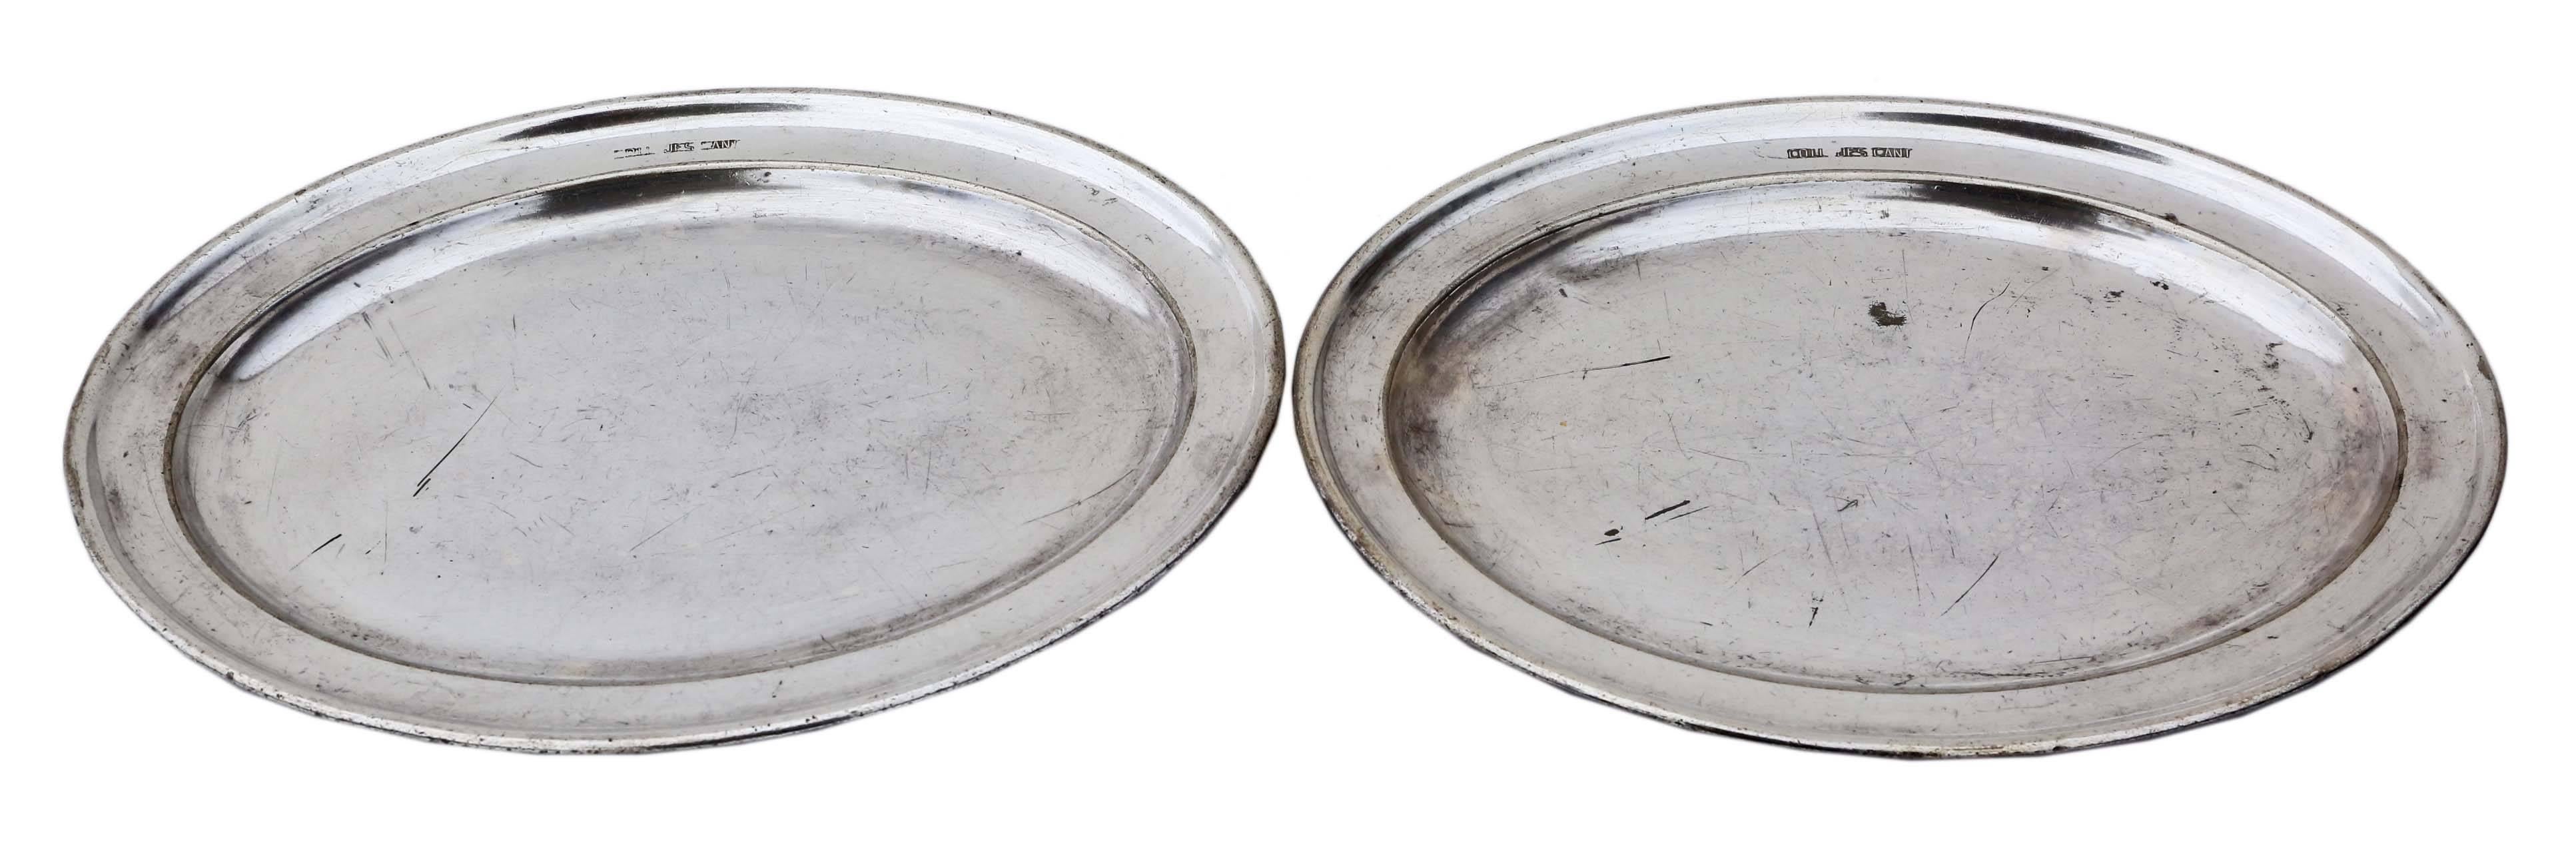 Antique collection of six pieces of Mappin & Web / Elkington & Co silver plate. Comes from the canteen at Jesus College Cambridge (engraved COLL. JES. CANT). Includes two oval trays 30cm x 22cm, a coffee pot 26cm x 11cm x 22cm tall, a serving dish